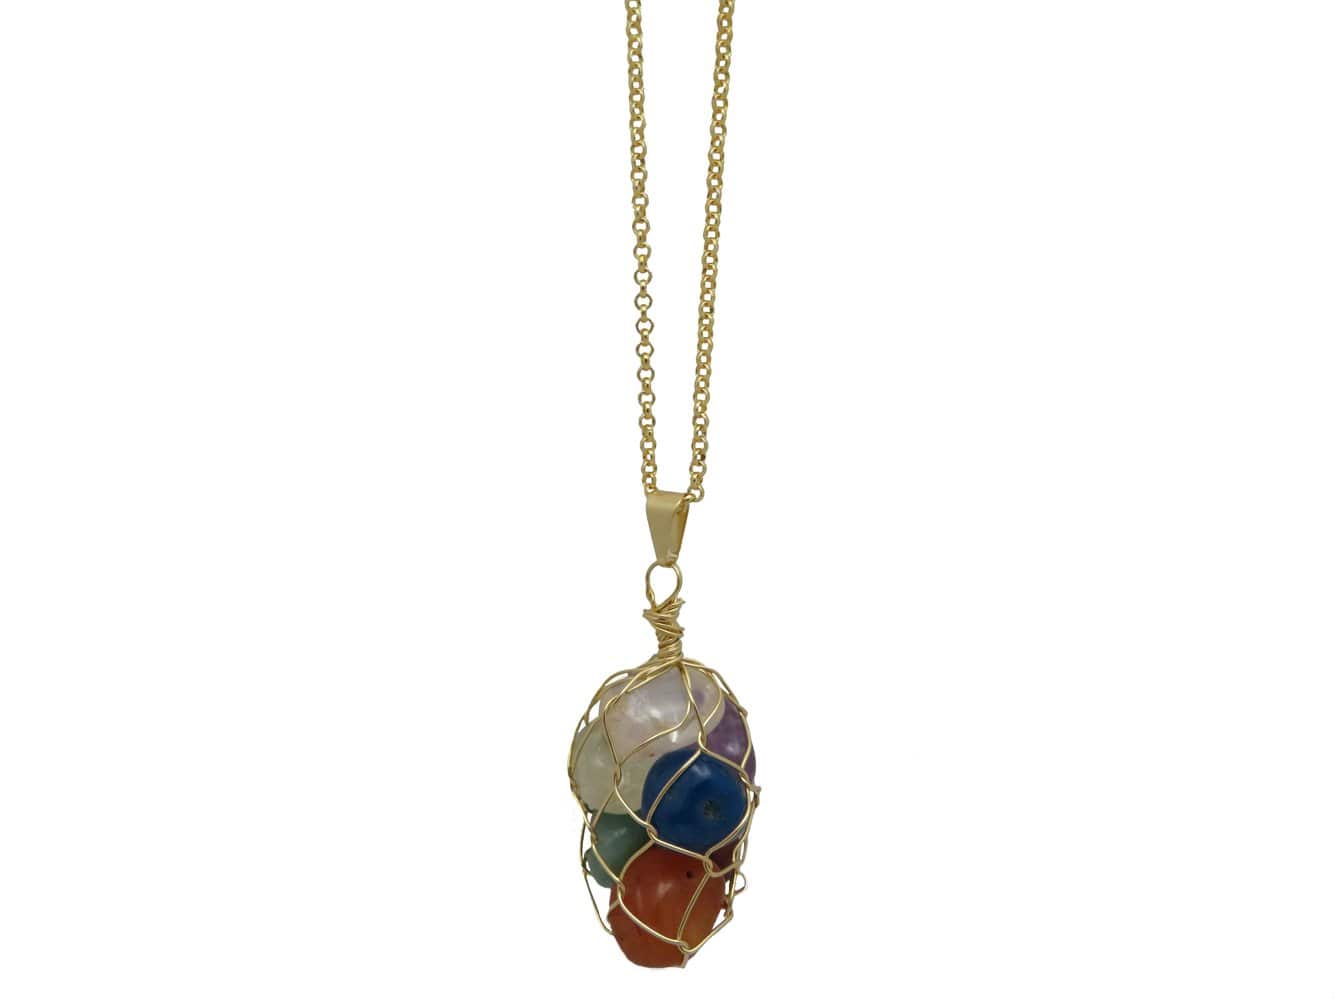 Wired Pendant With Natural 7 Chakra Reiki Healing Stones - hanging on a chain